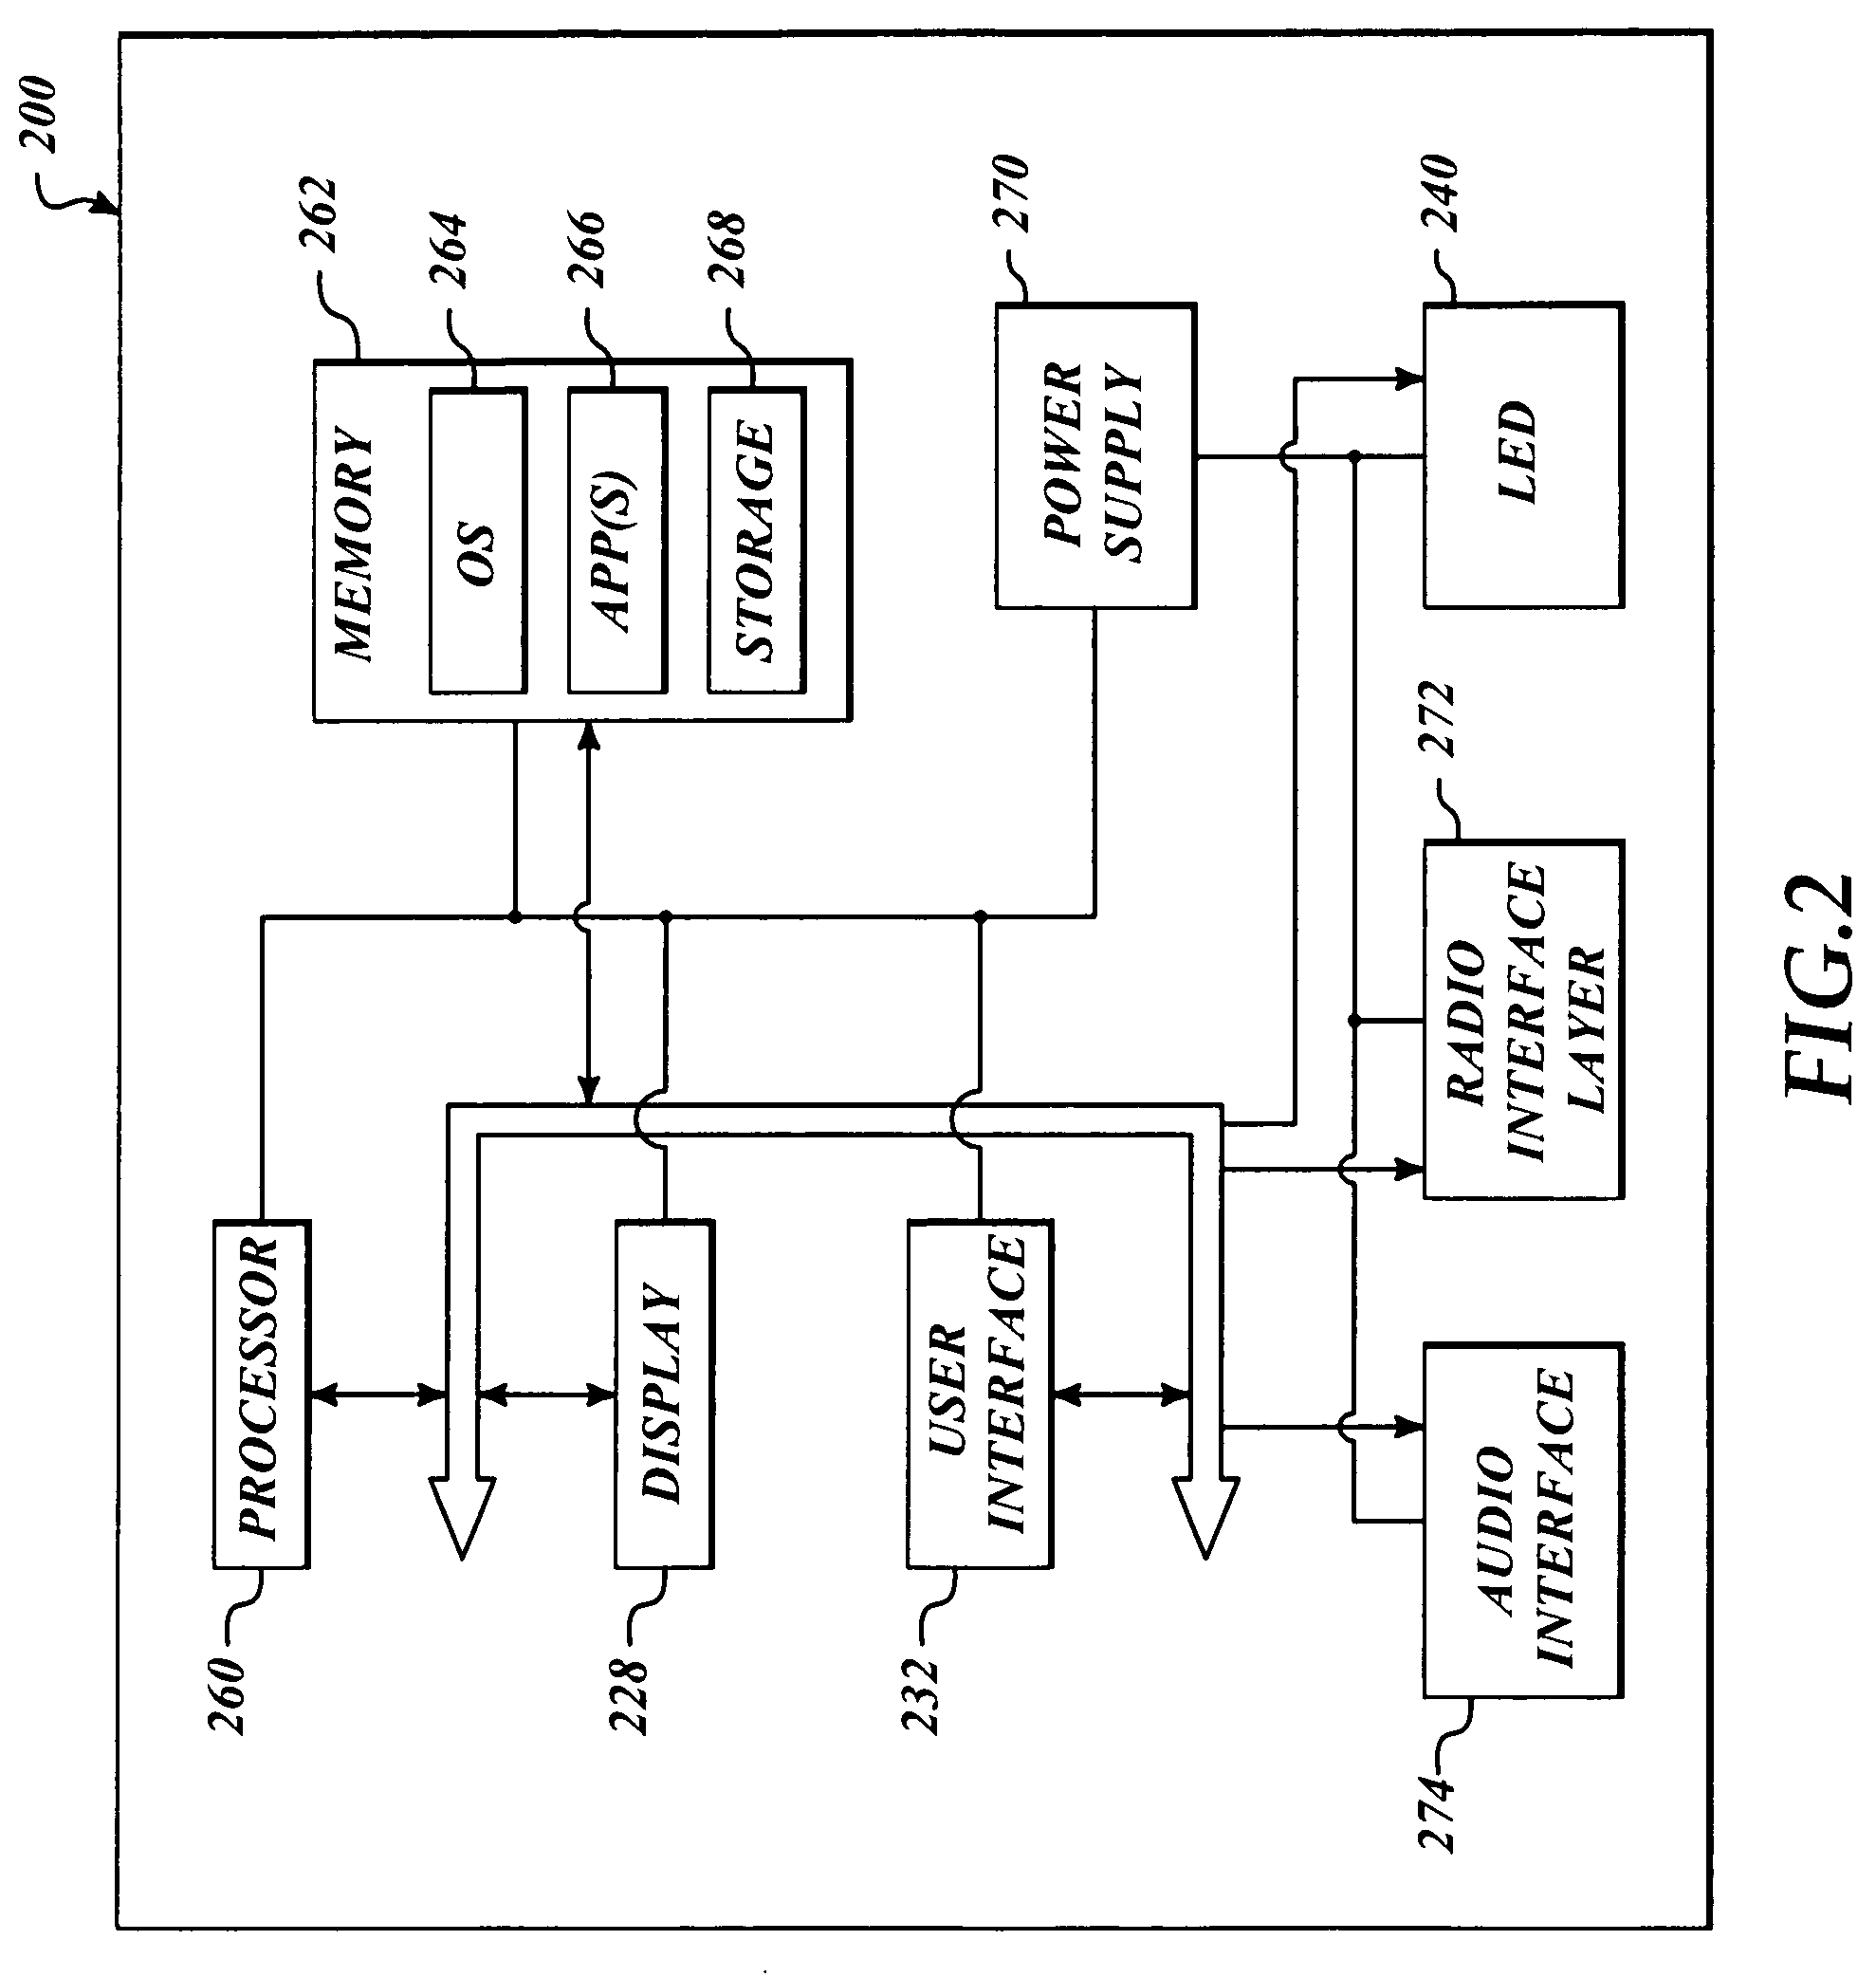 Dynamic bias for receiver controlled by radio link quality